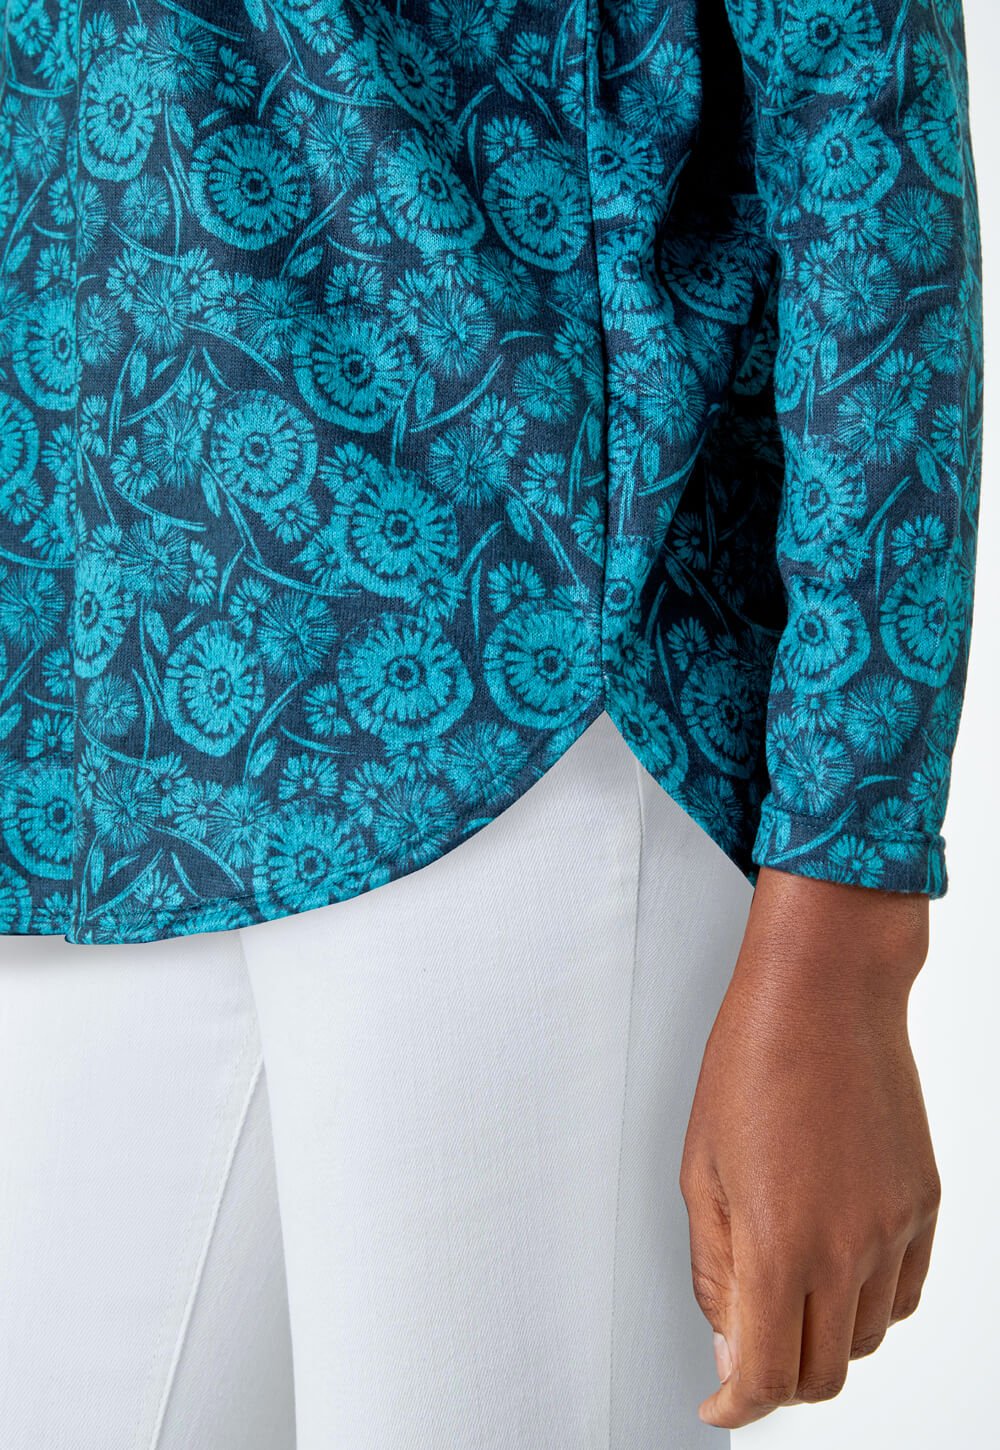 Teal Floral Soft Stretch Jersey Top, Image 5 of 5